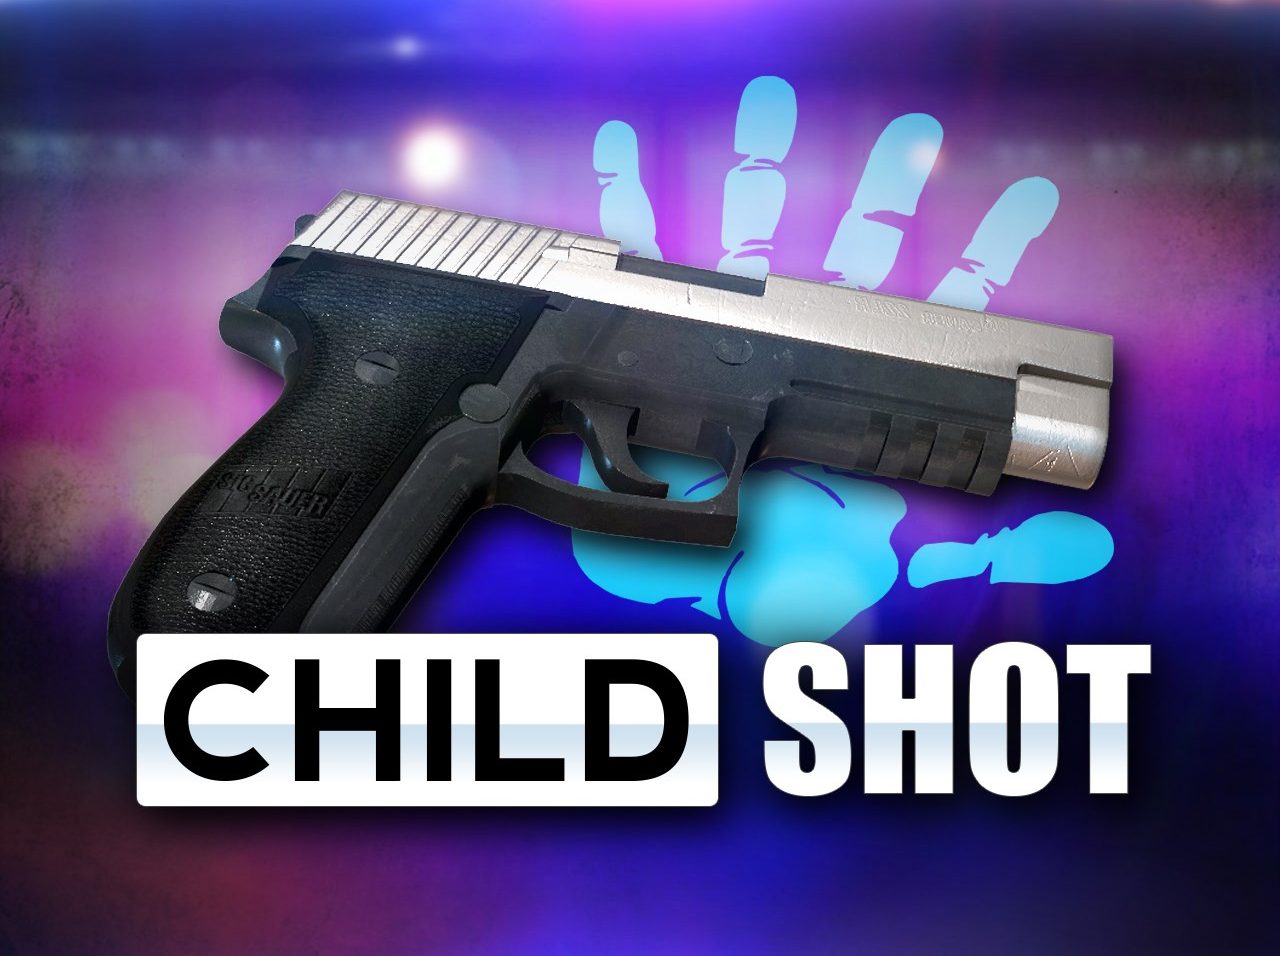 Police say boy’s fatal shooting was accidental